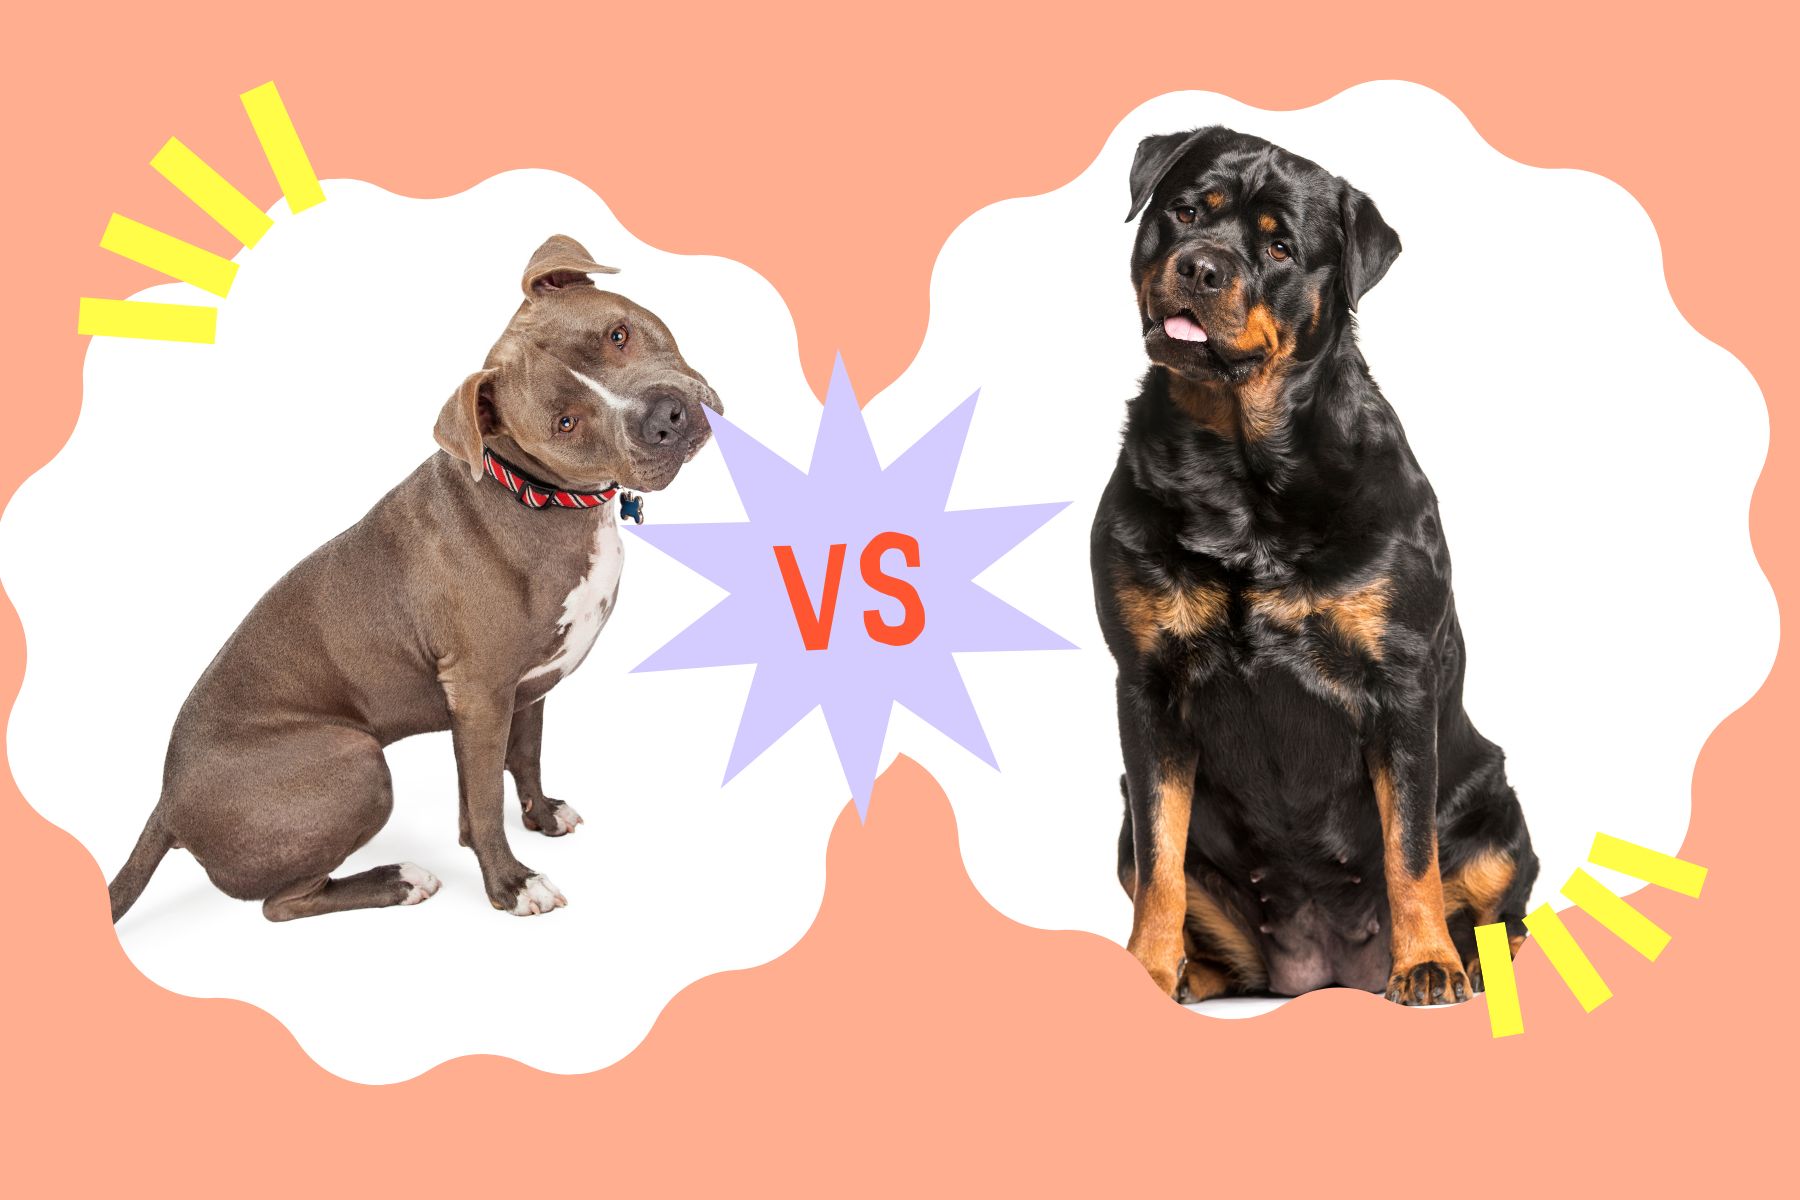 Rottweiler vs Pitbull side by side comparison